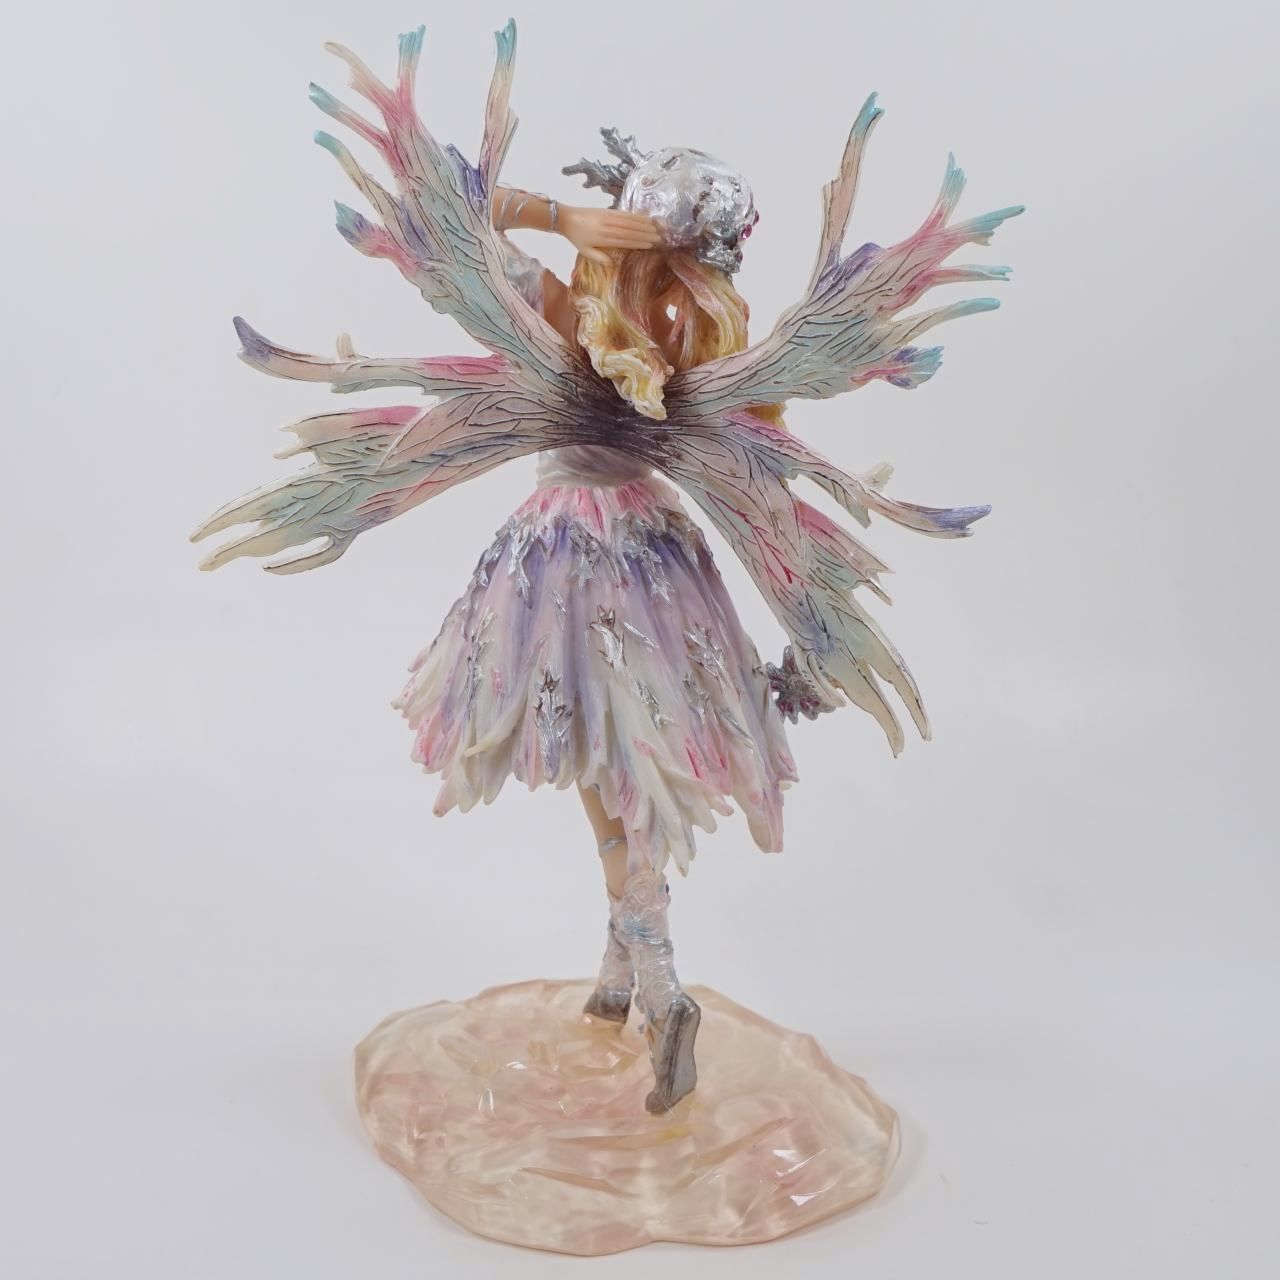 Crisalis Collection★ Ice Princess Faerie (1-5384) 10% OFF